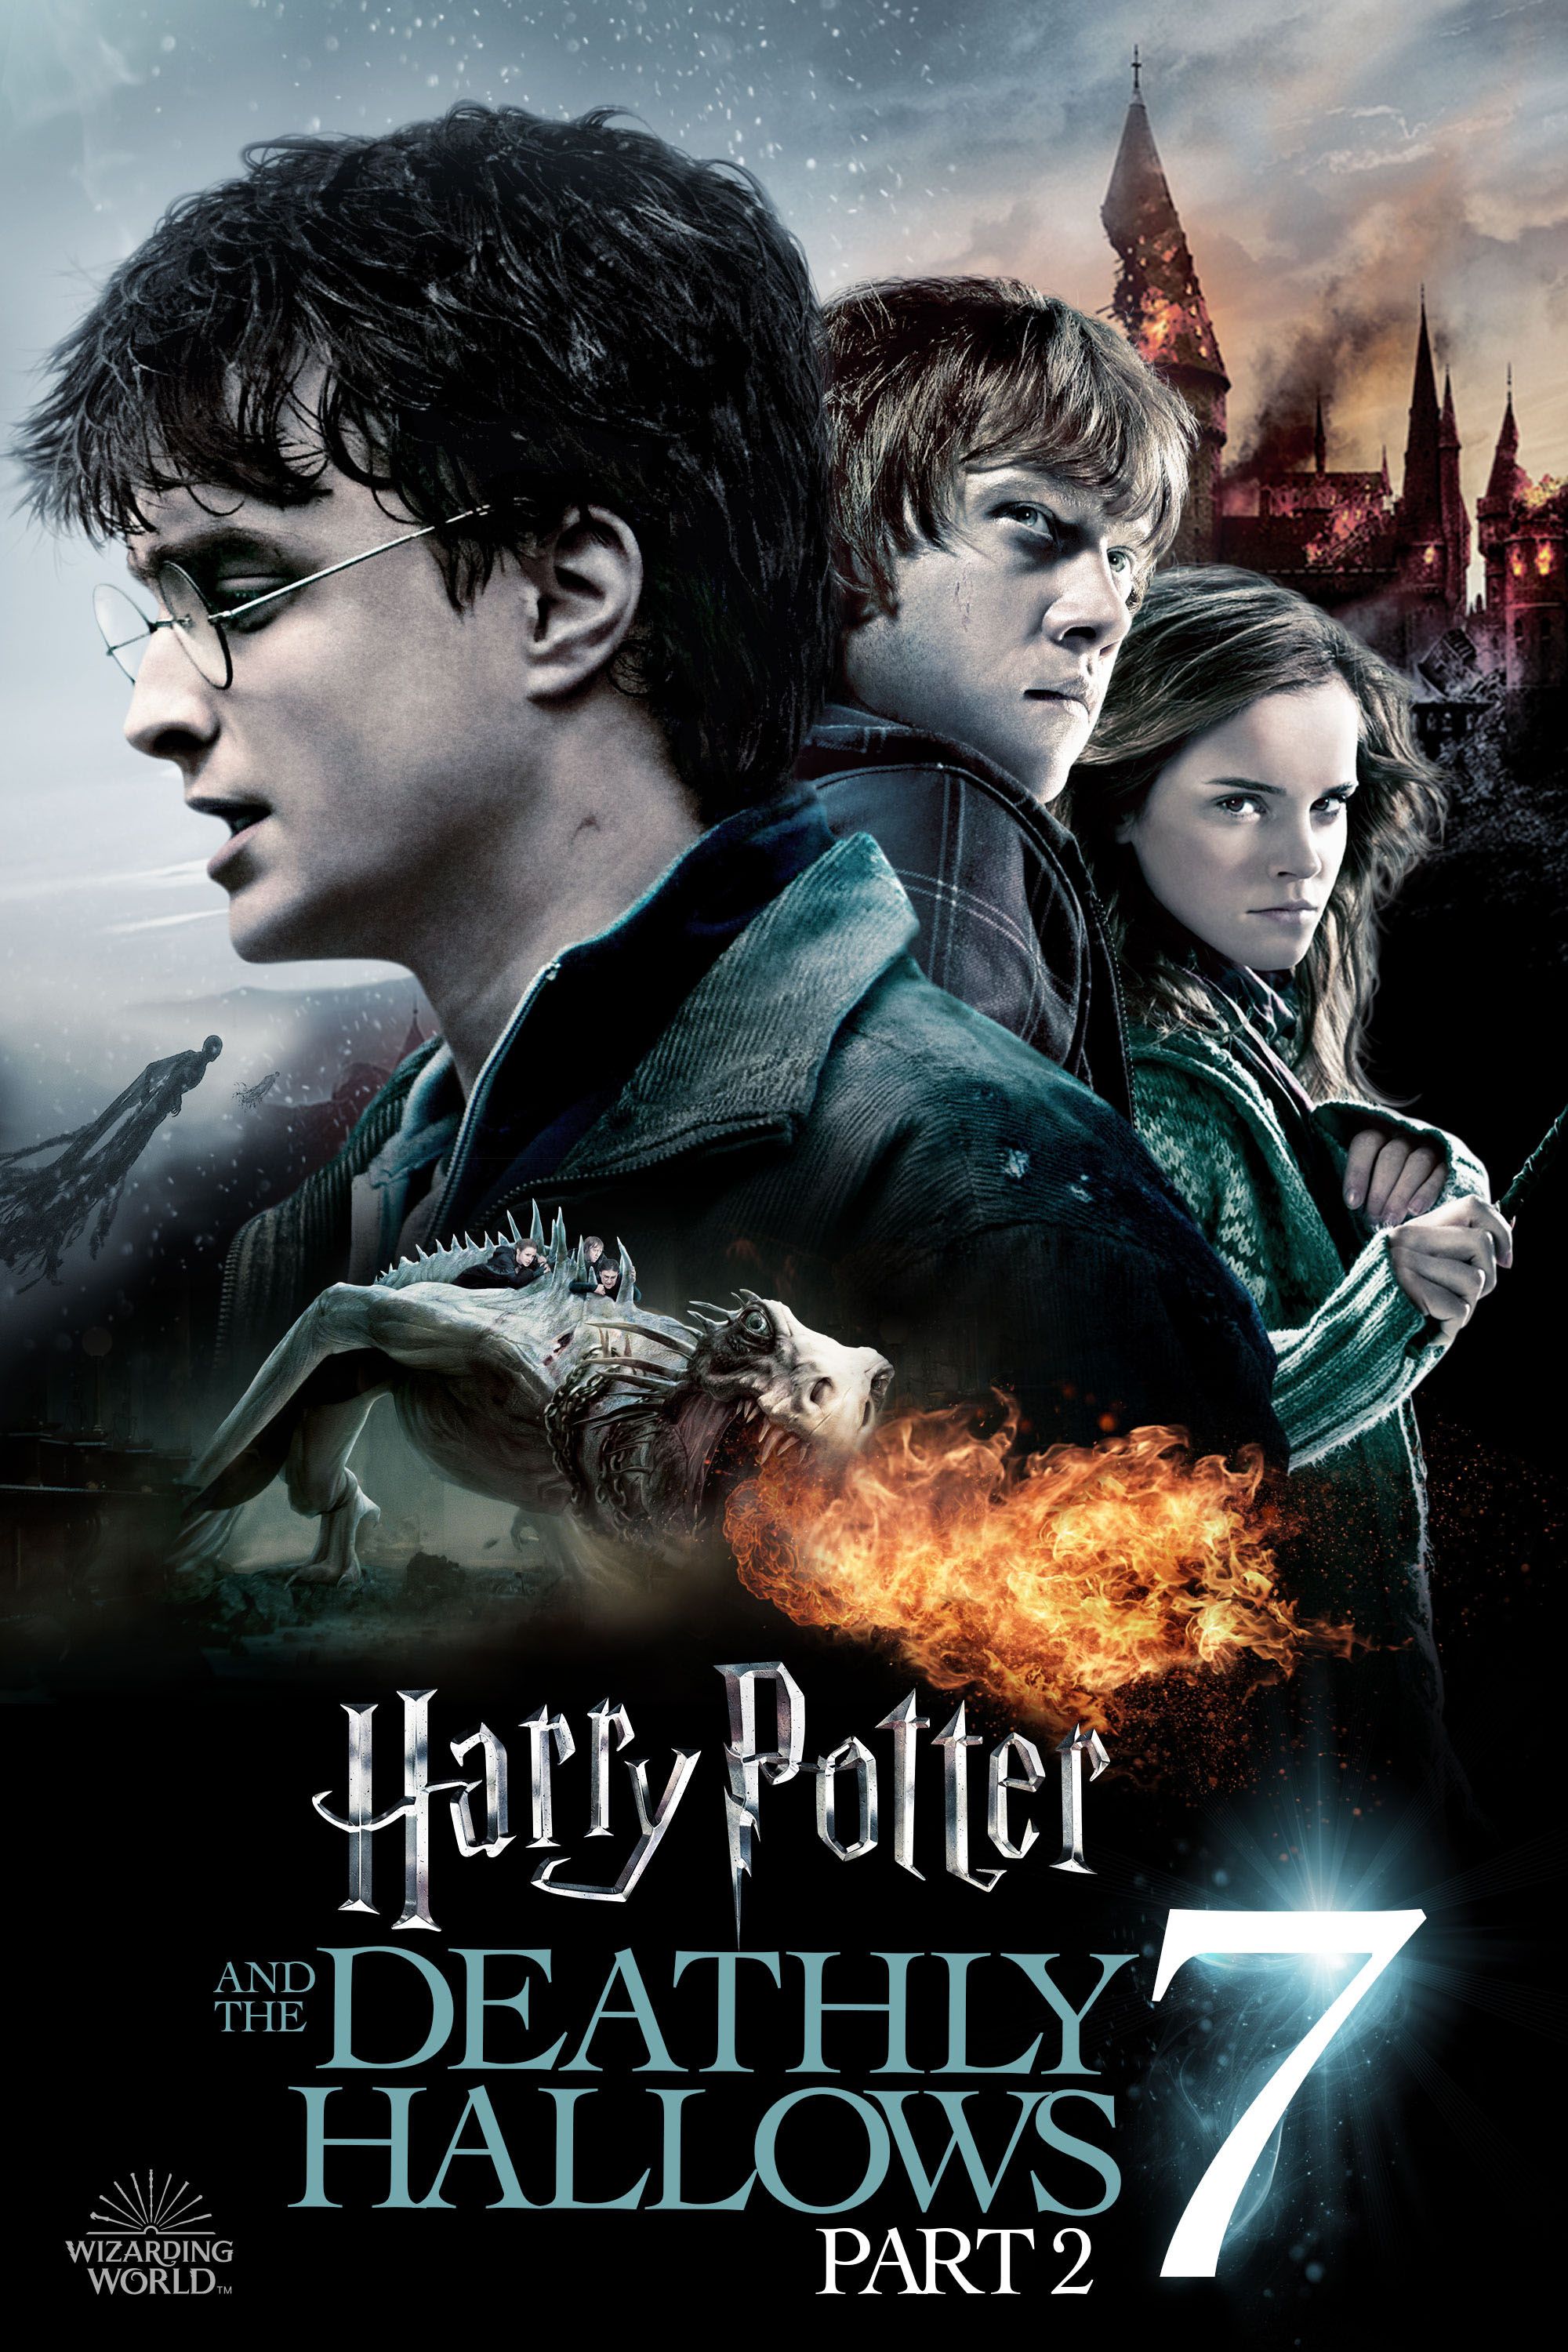 Harry Potter and the Deathly Hallows Part 1' film concert